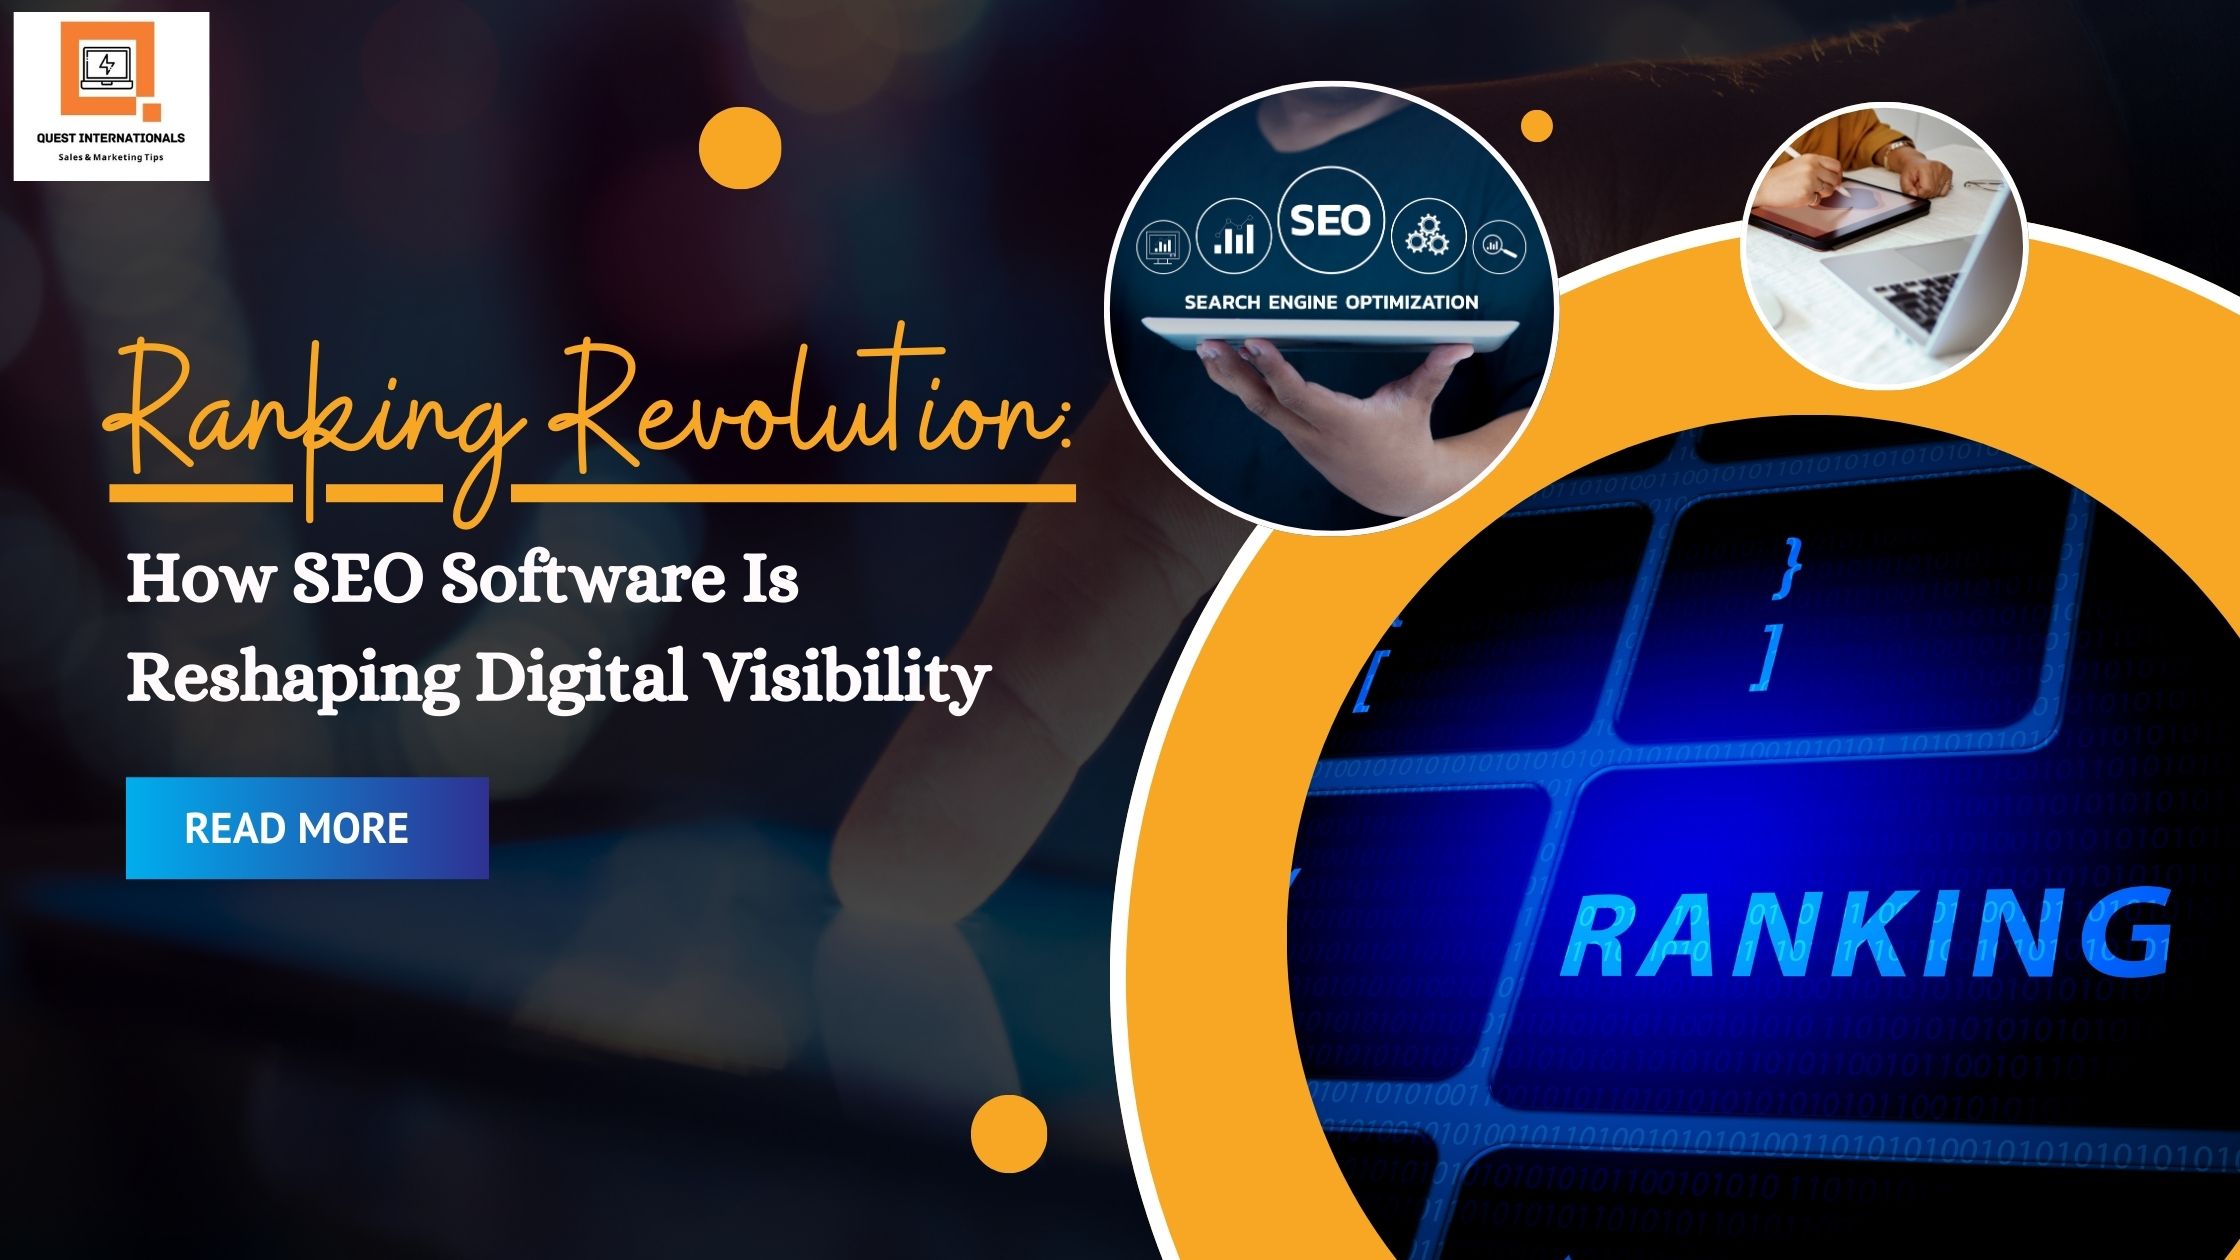 You are currently viewing Ranking Revolution: How SEO Software Is Reshaping Digital Visibility